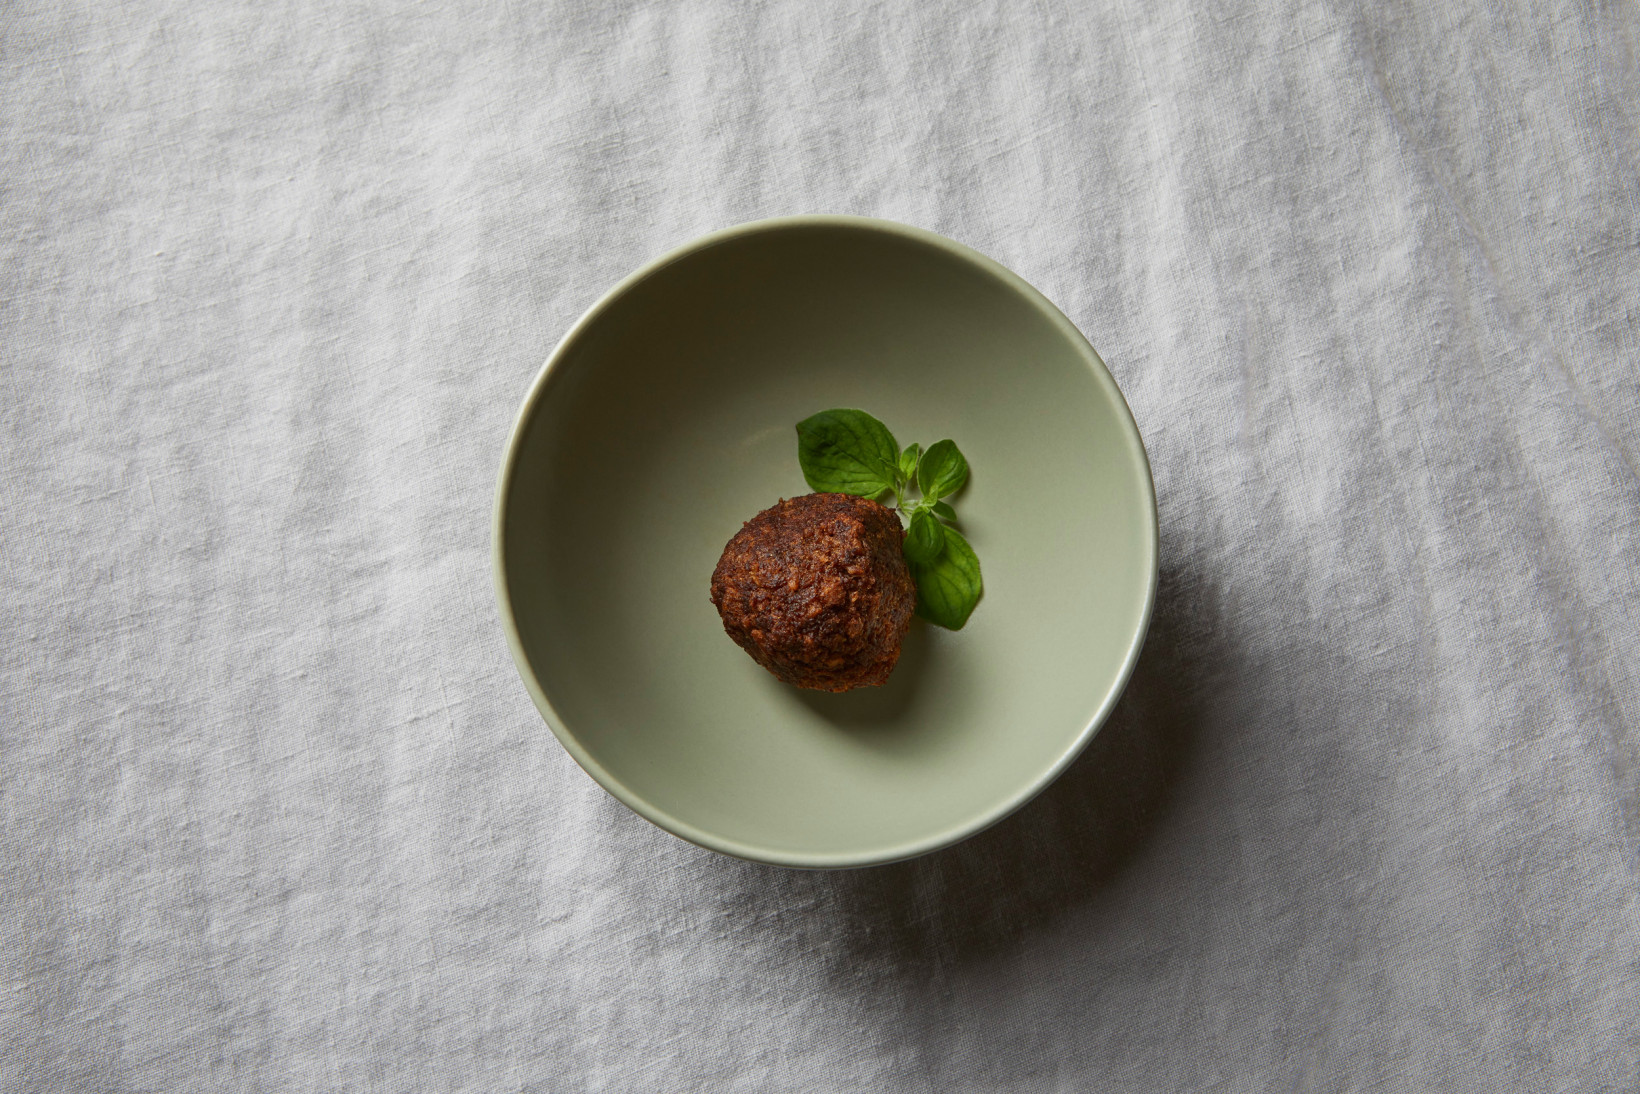 A vegetarian meatball made from mycoprotein on a plate